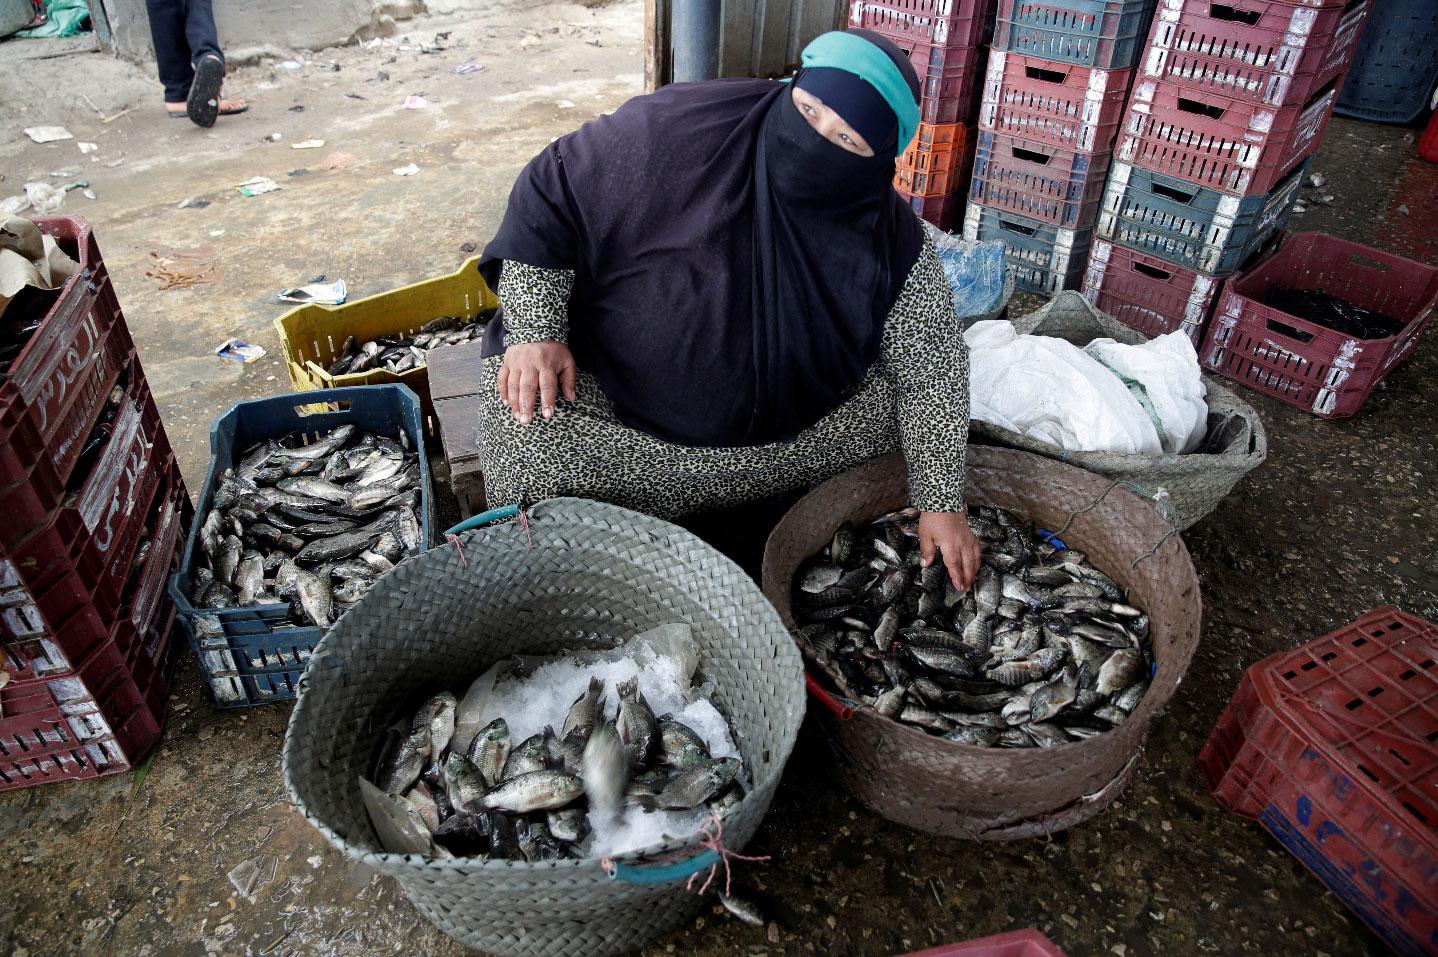 A woman sells fish caught by her husband at the market in Egypt's Nile Delta village of El Shakhluba